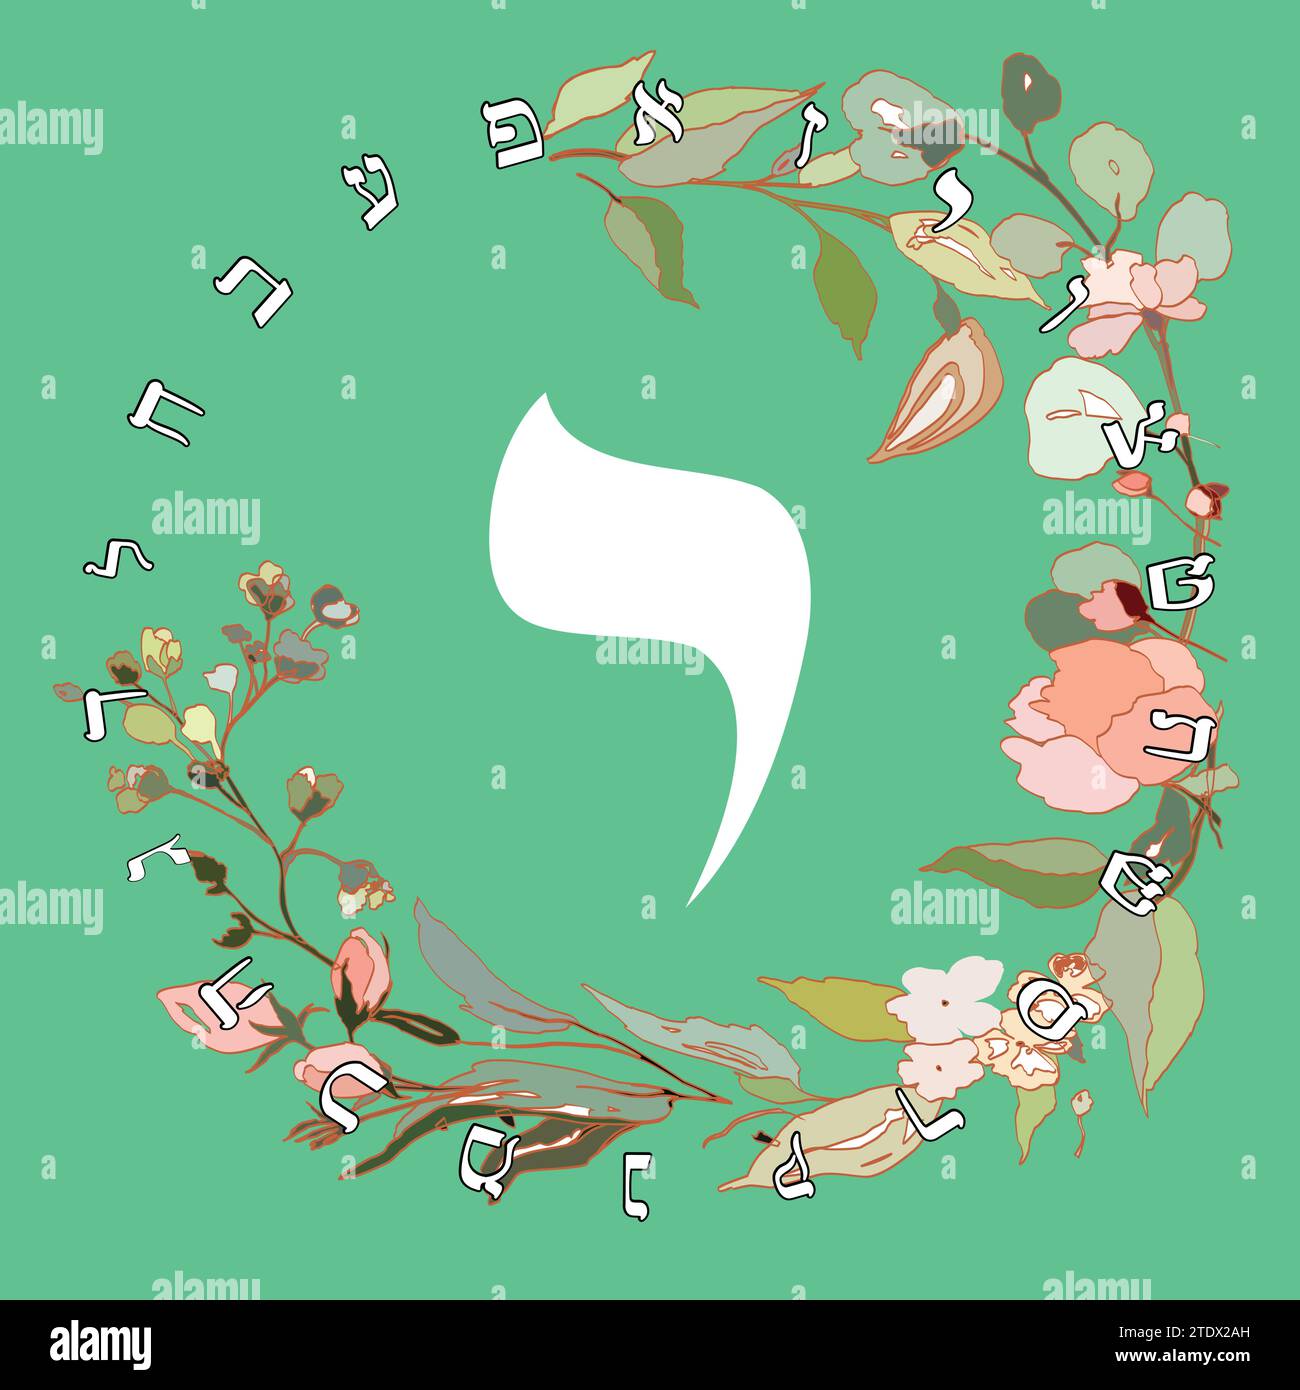 Vector illustration of the Hebrew alphabet with floral design. Hebrew letter called Yod white on green background. Stock Vector